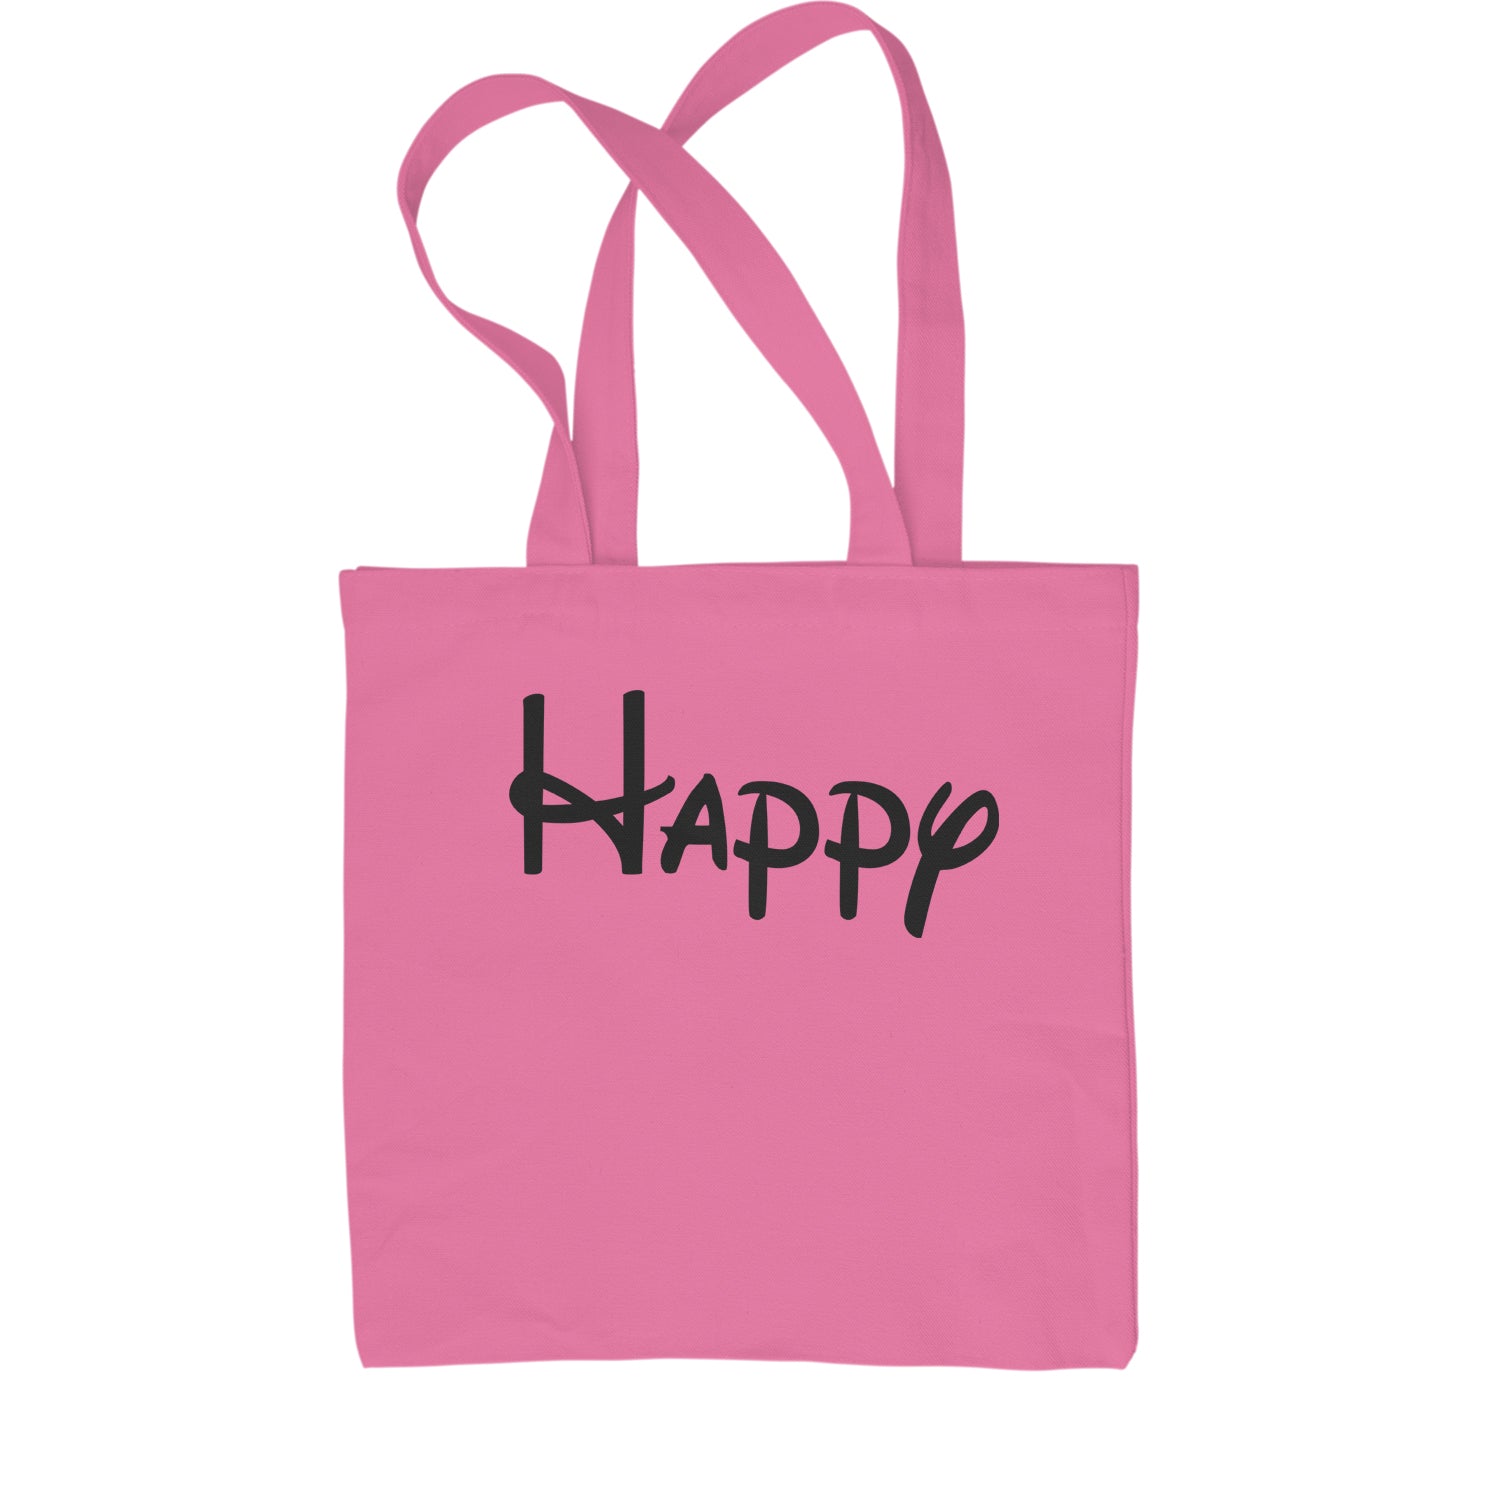 Happy - 7 Dwarfs Costume Shopping Tote Bag and, costume, dwarfs, group, halloween, matching, seven, snow, the, white by Expression Tees